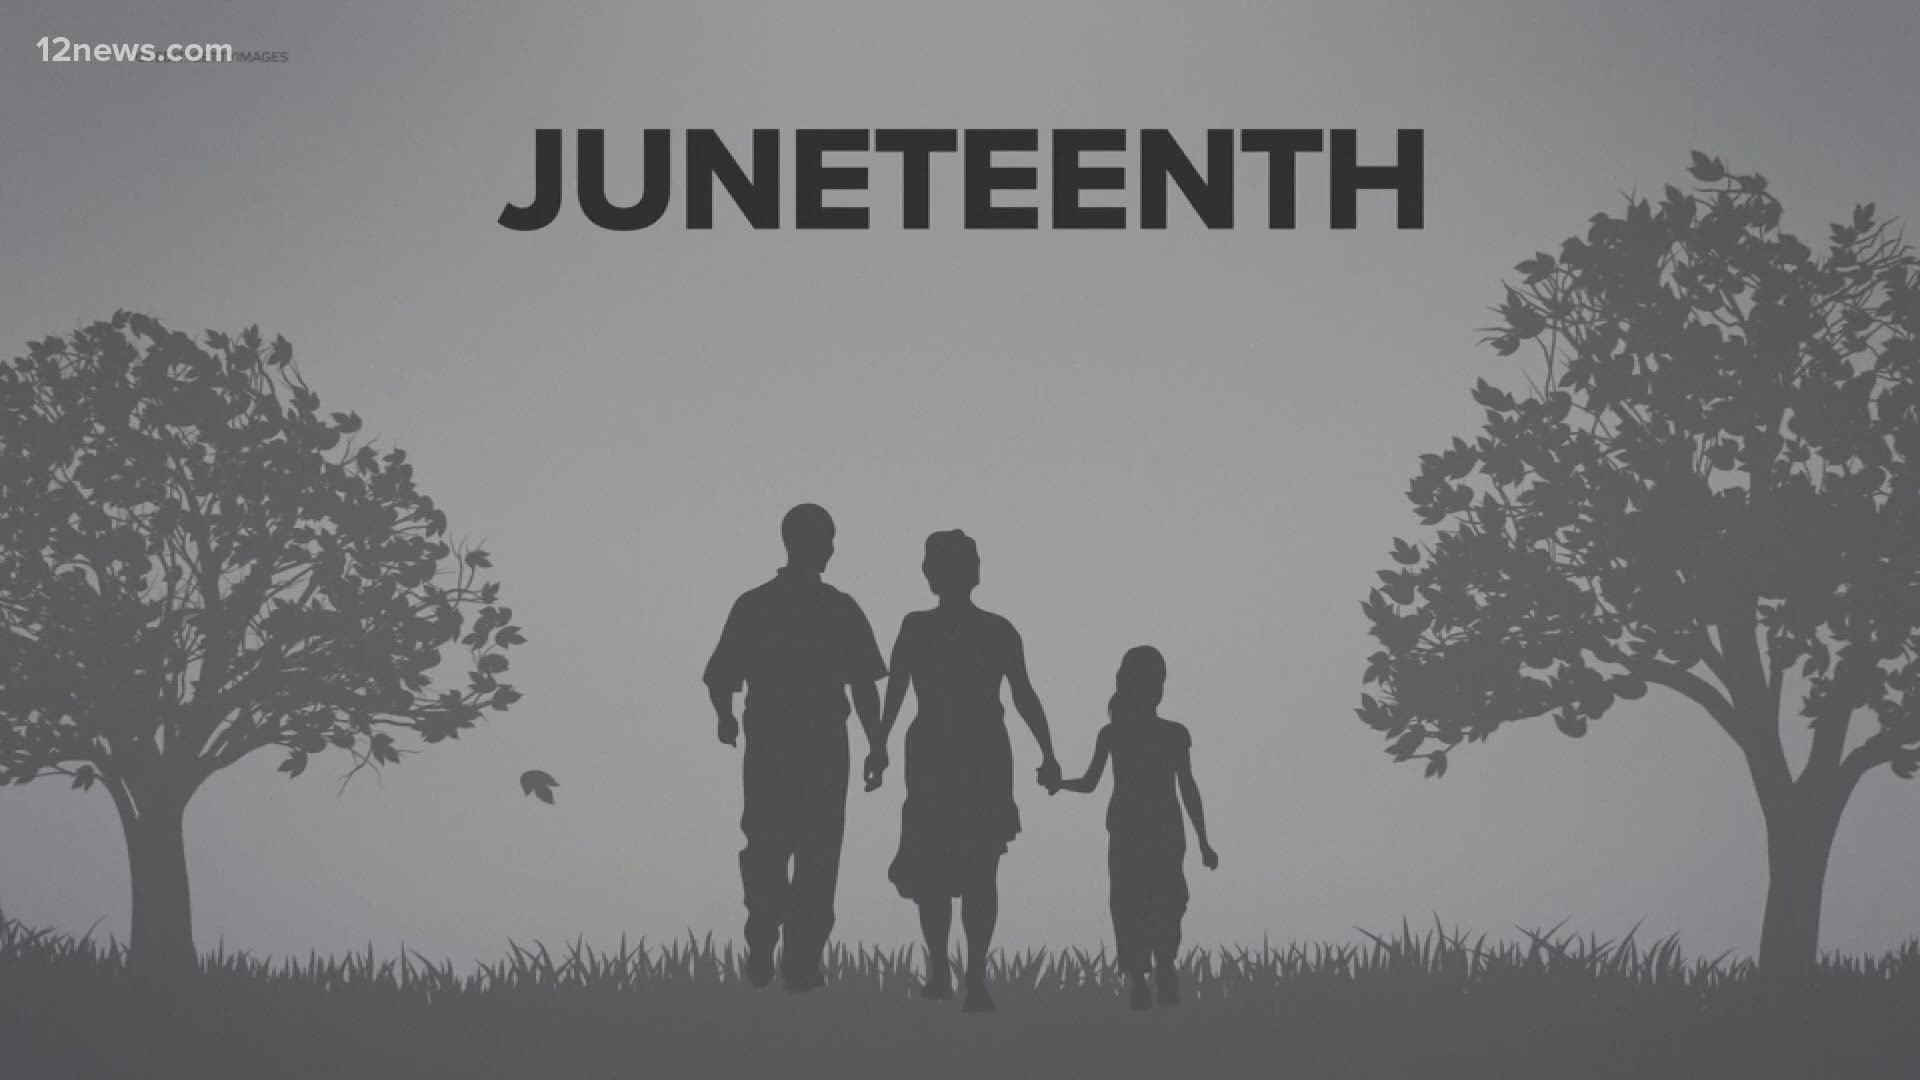 What exactly is Juneteenth? Here's an explanation of the history behind the holiday.